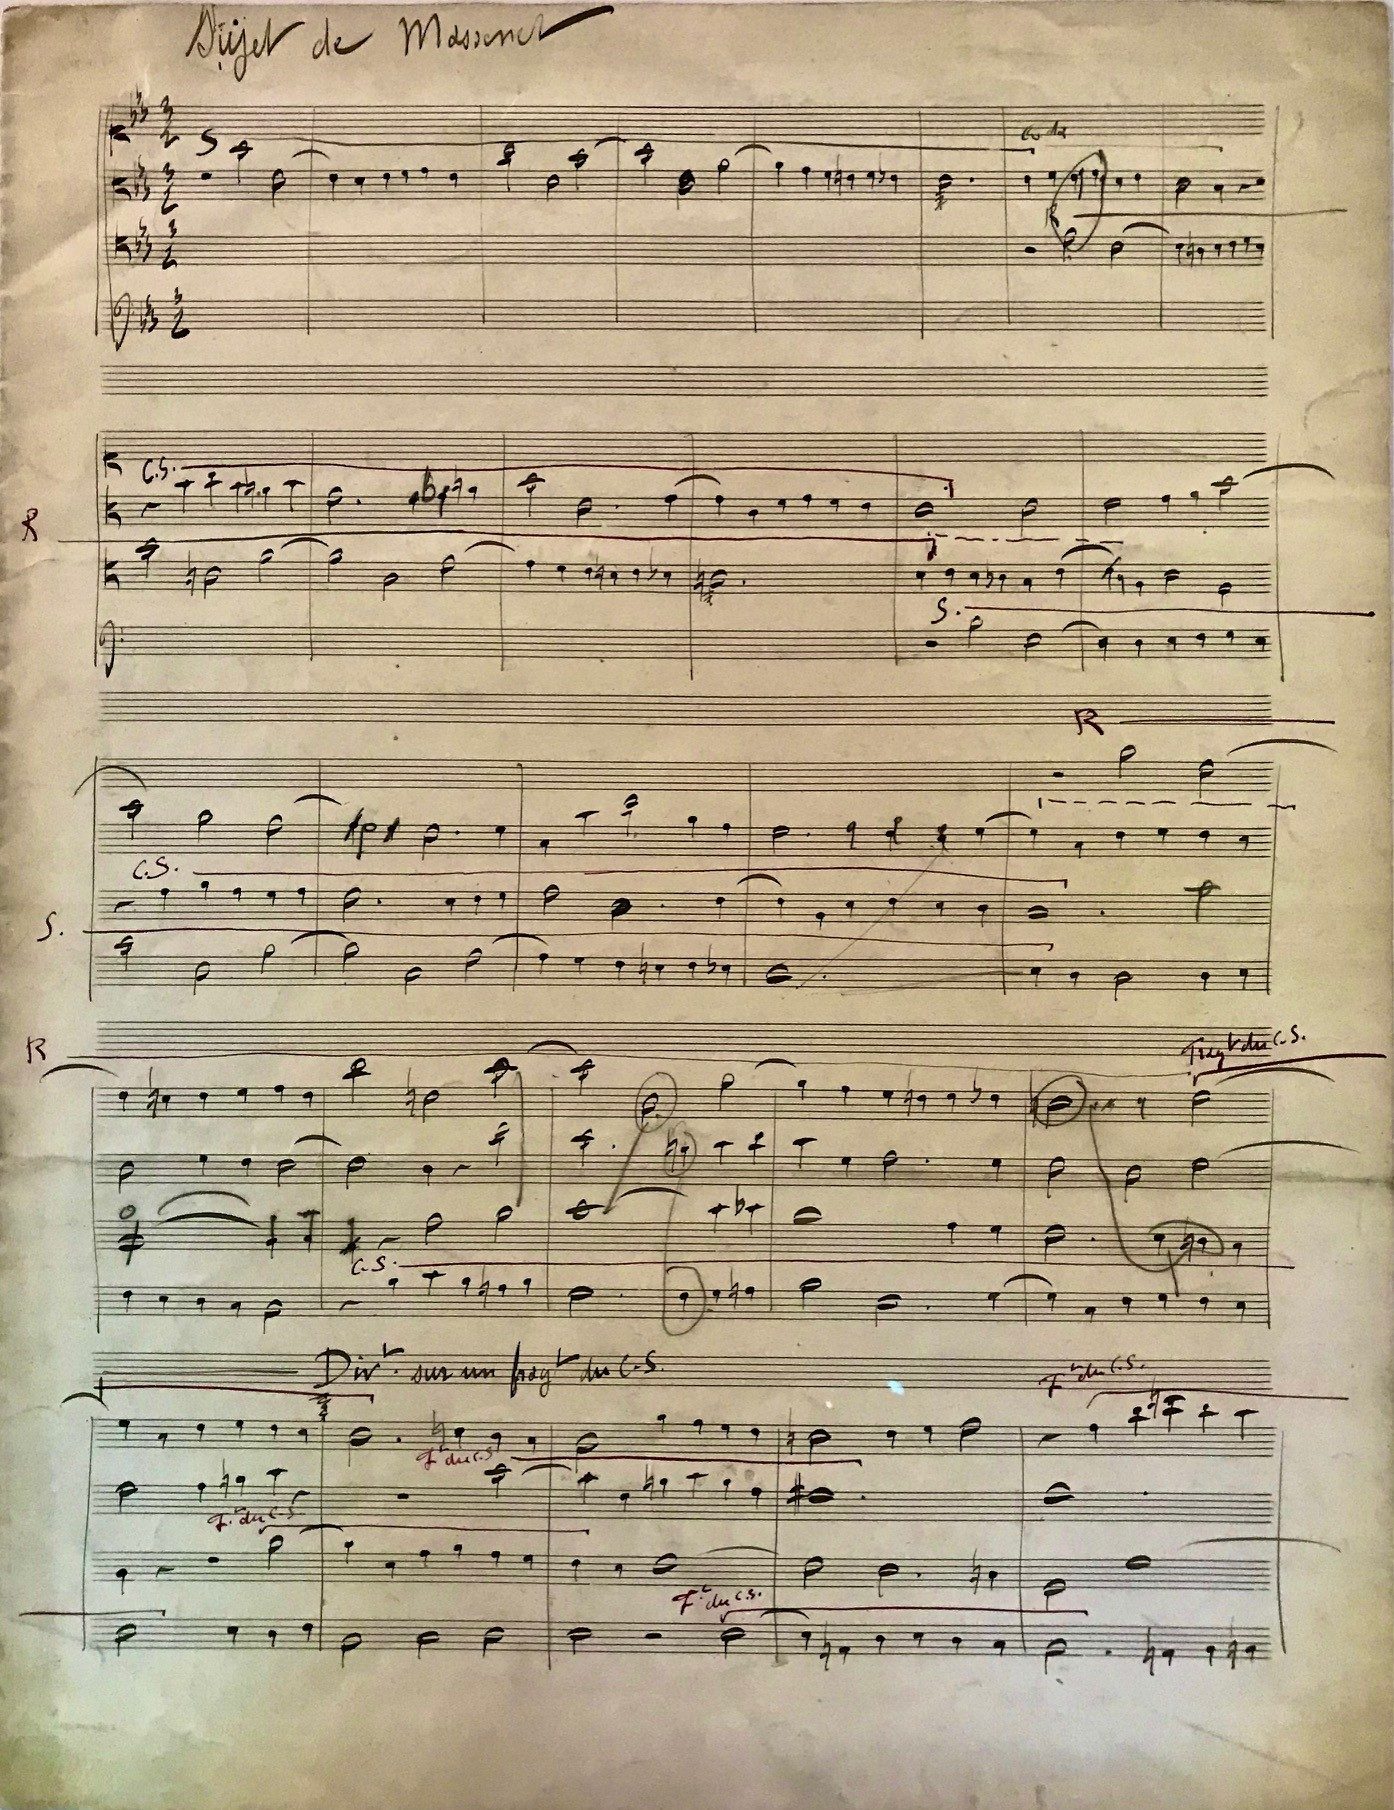 Ravel Autograph Musical Ms. on a “Subject” by Massenet & a Minor Thought on Beethoven